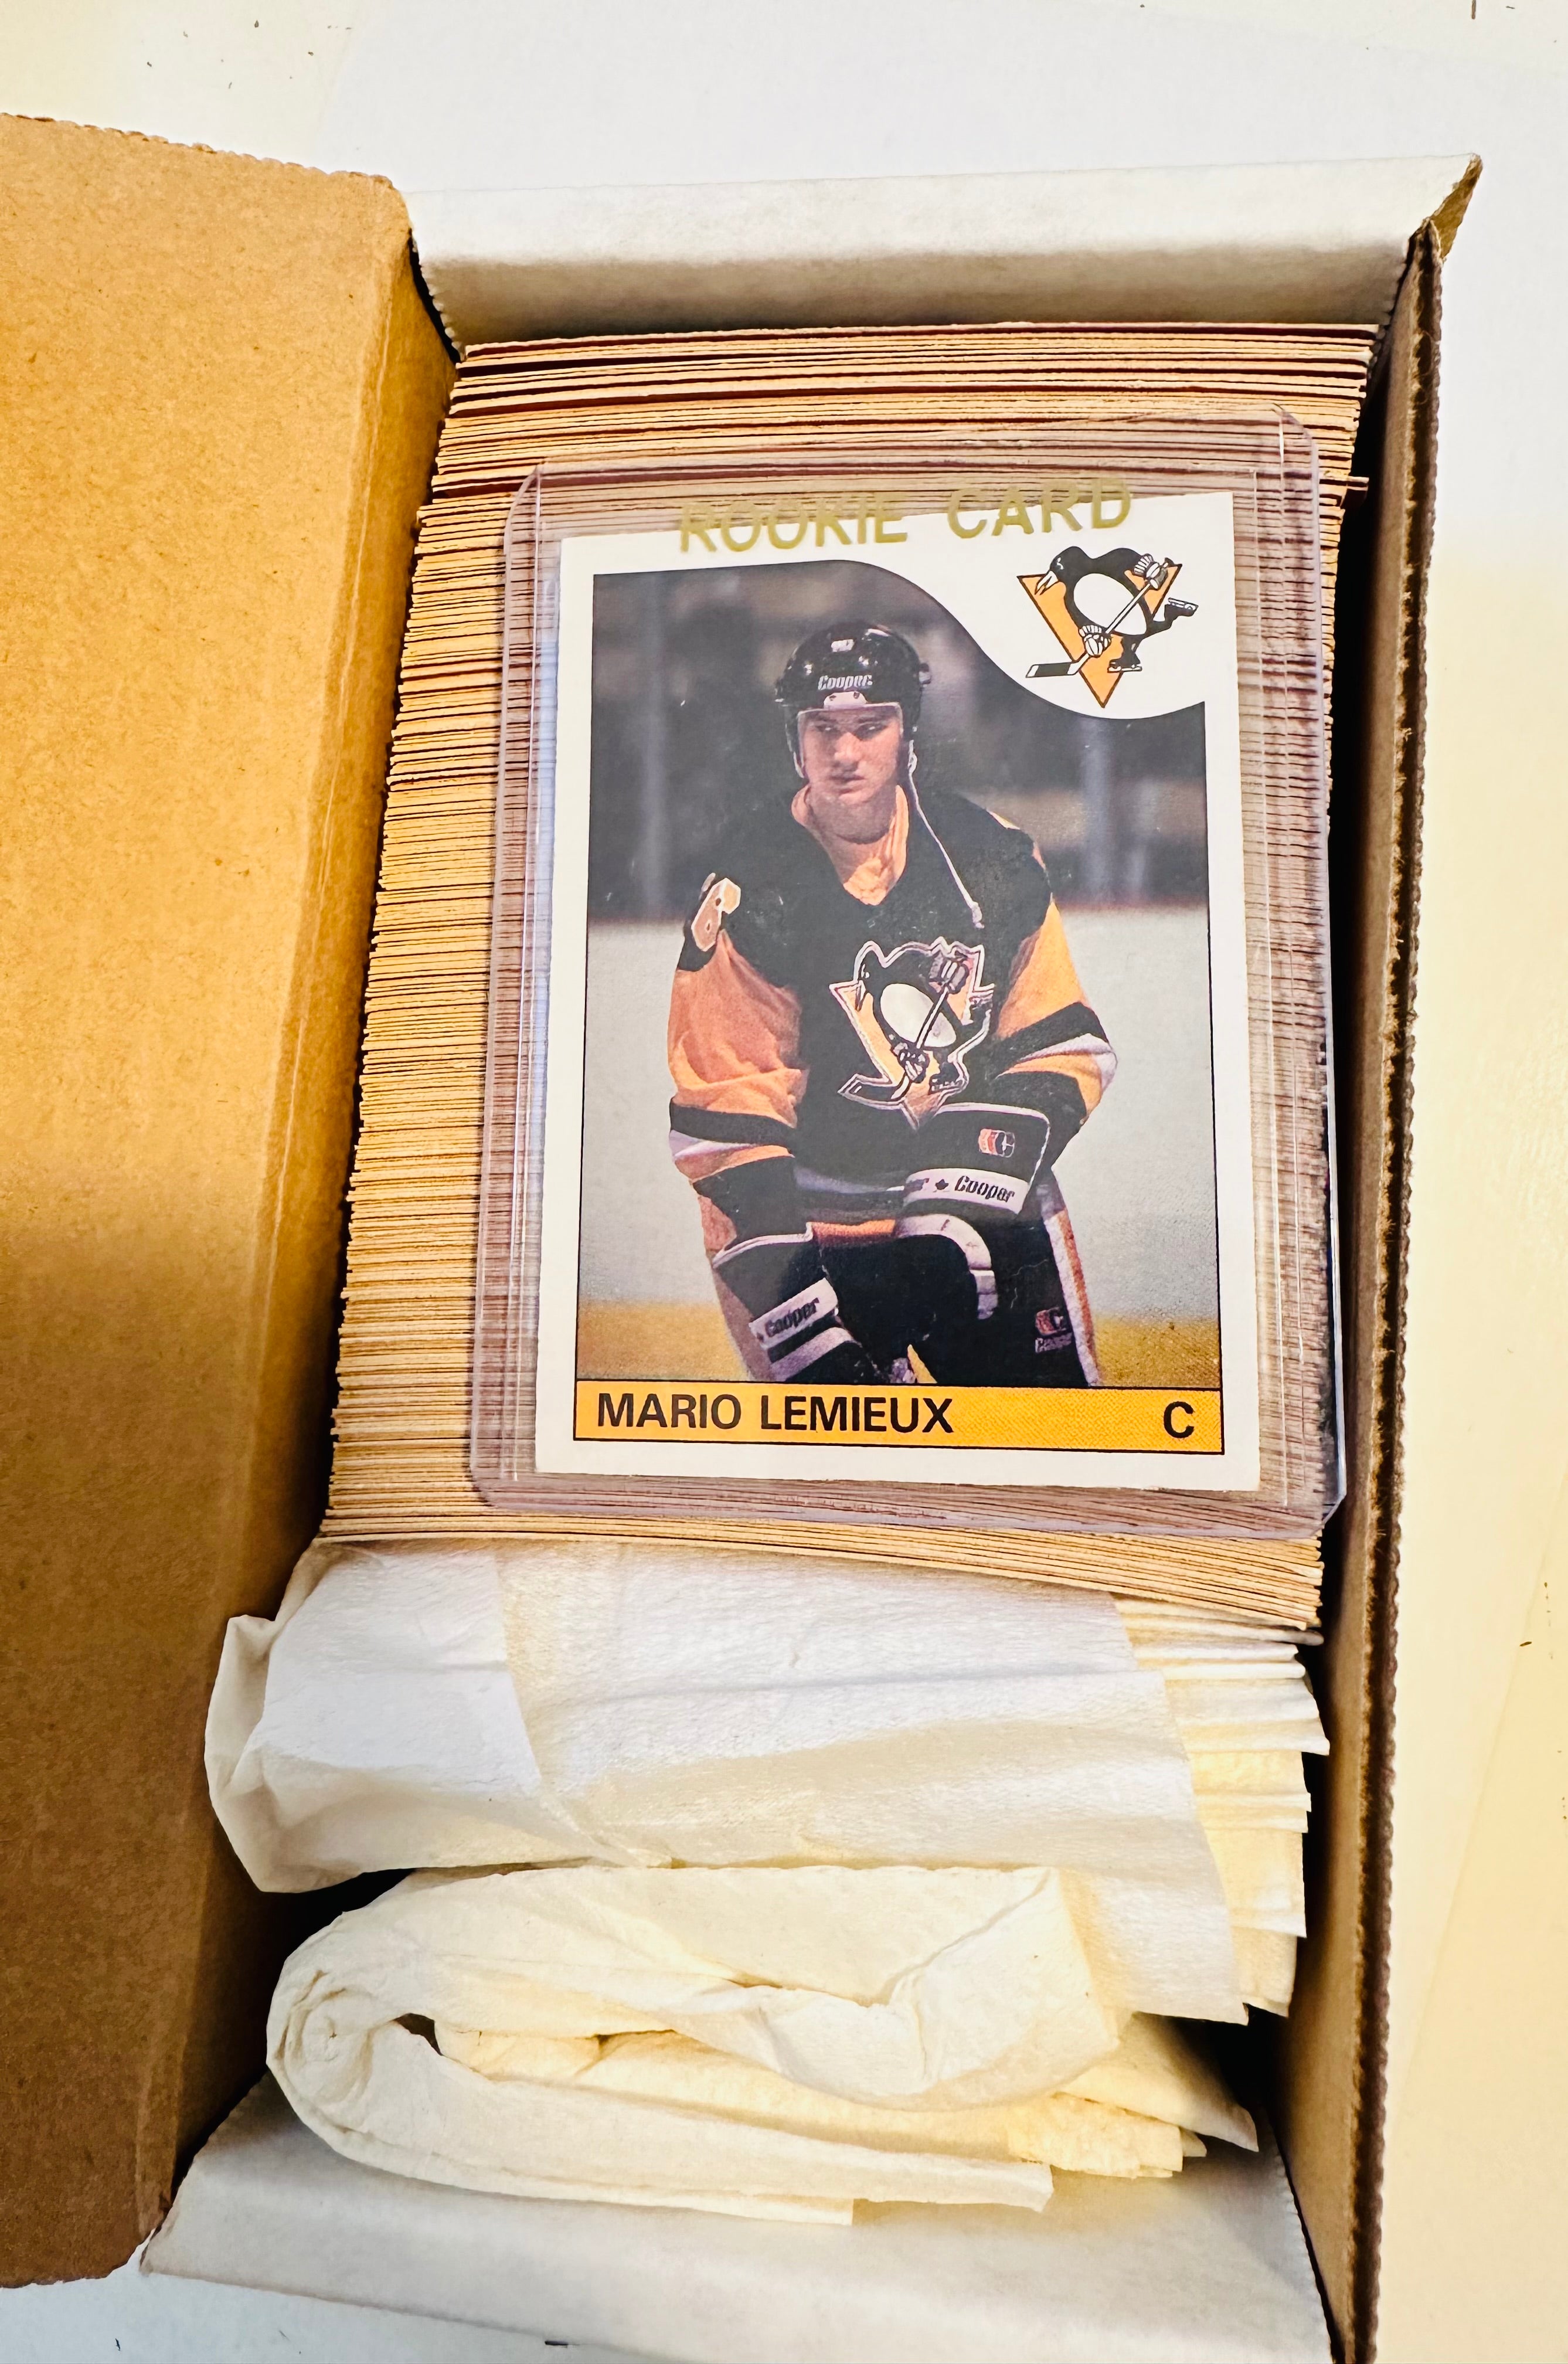 1985-86 Opc hockey cards high grade condition cards set with Mario Lemieux rookie